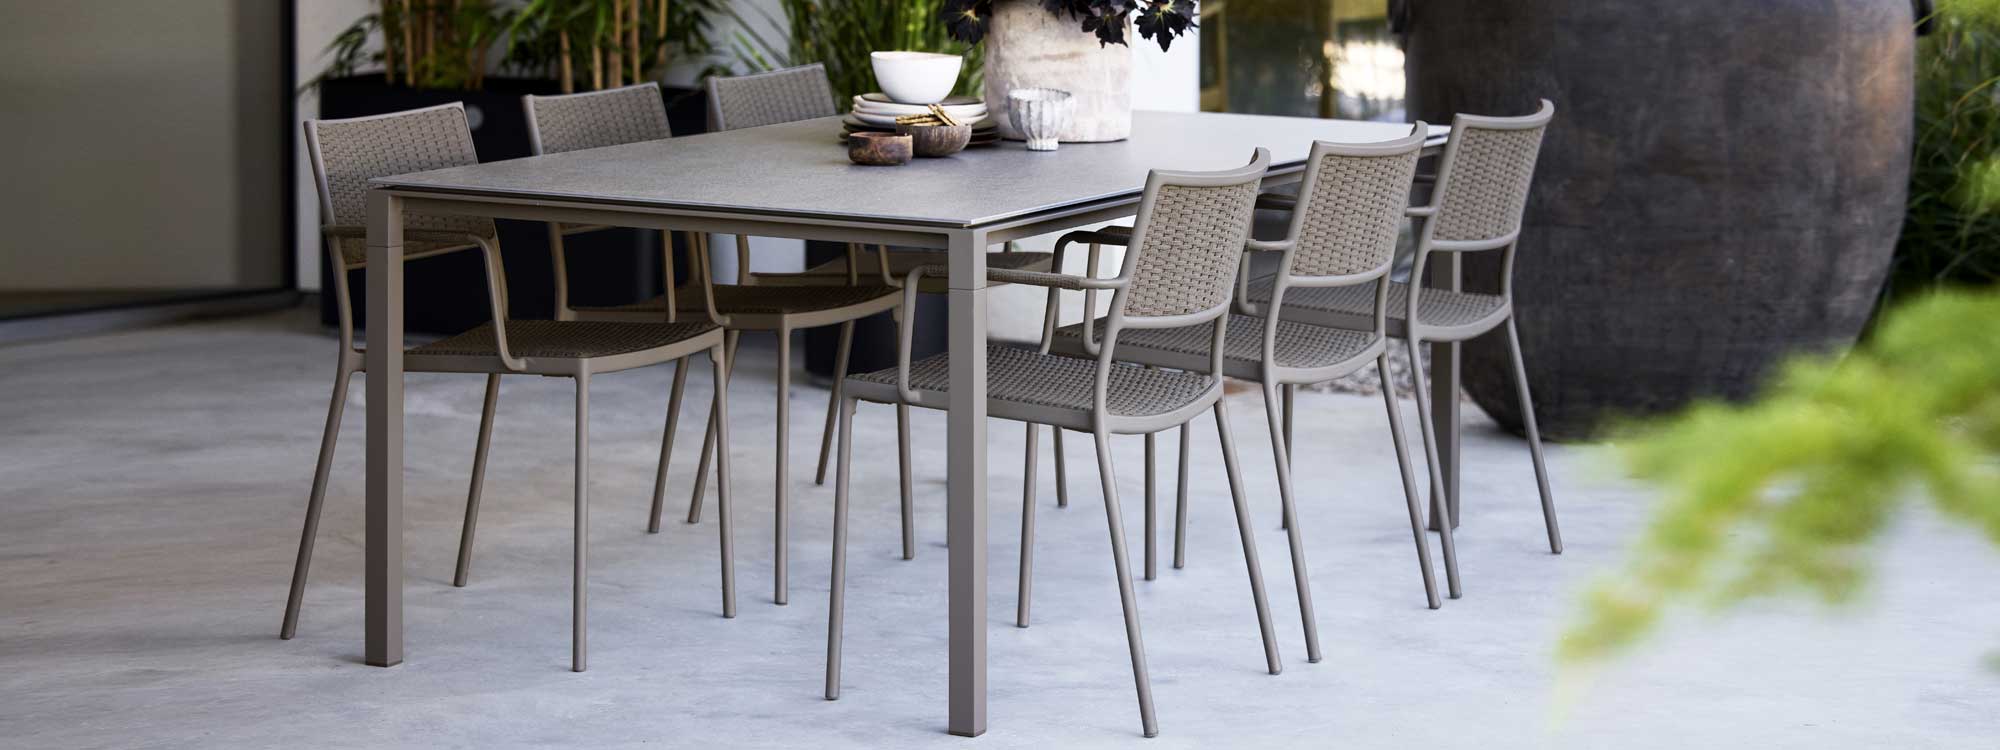 Image of taupe Soft Rope Less chairs and taupe Pure ceramic garden table by Cane-line